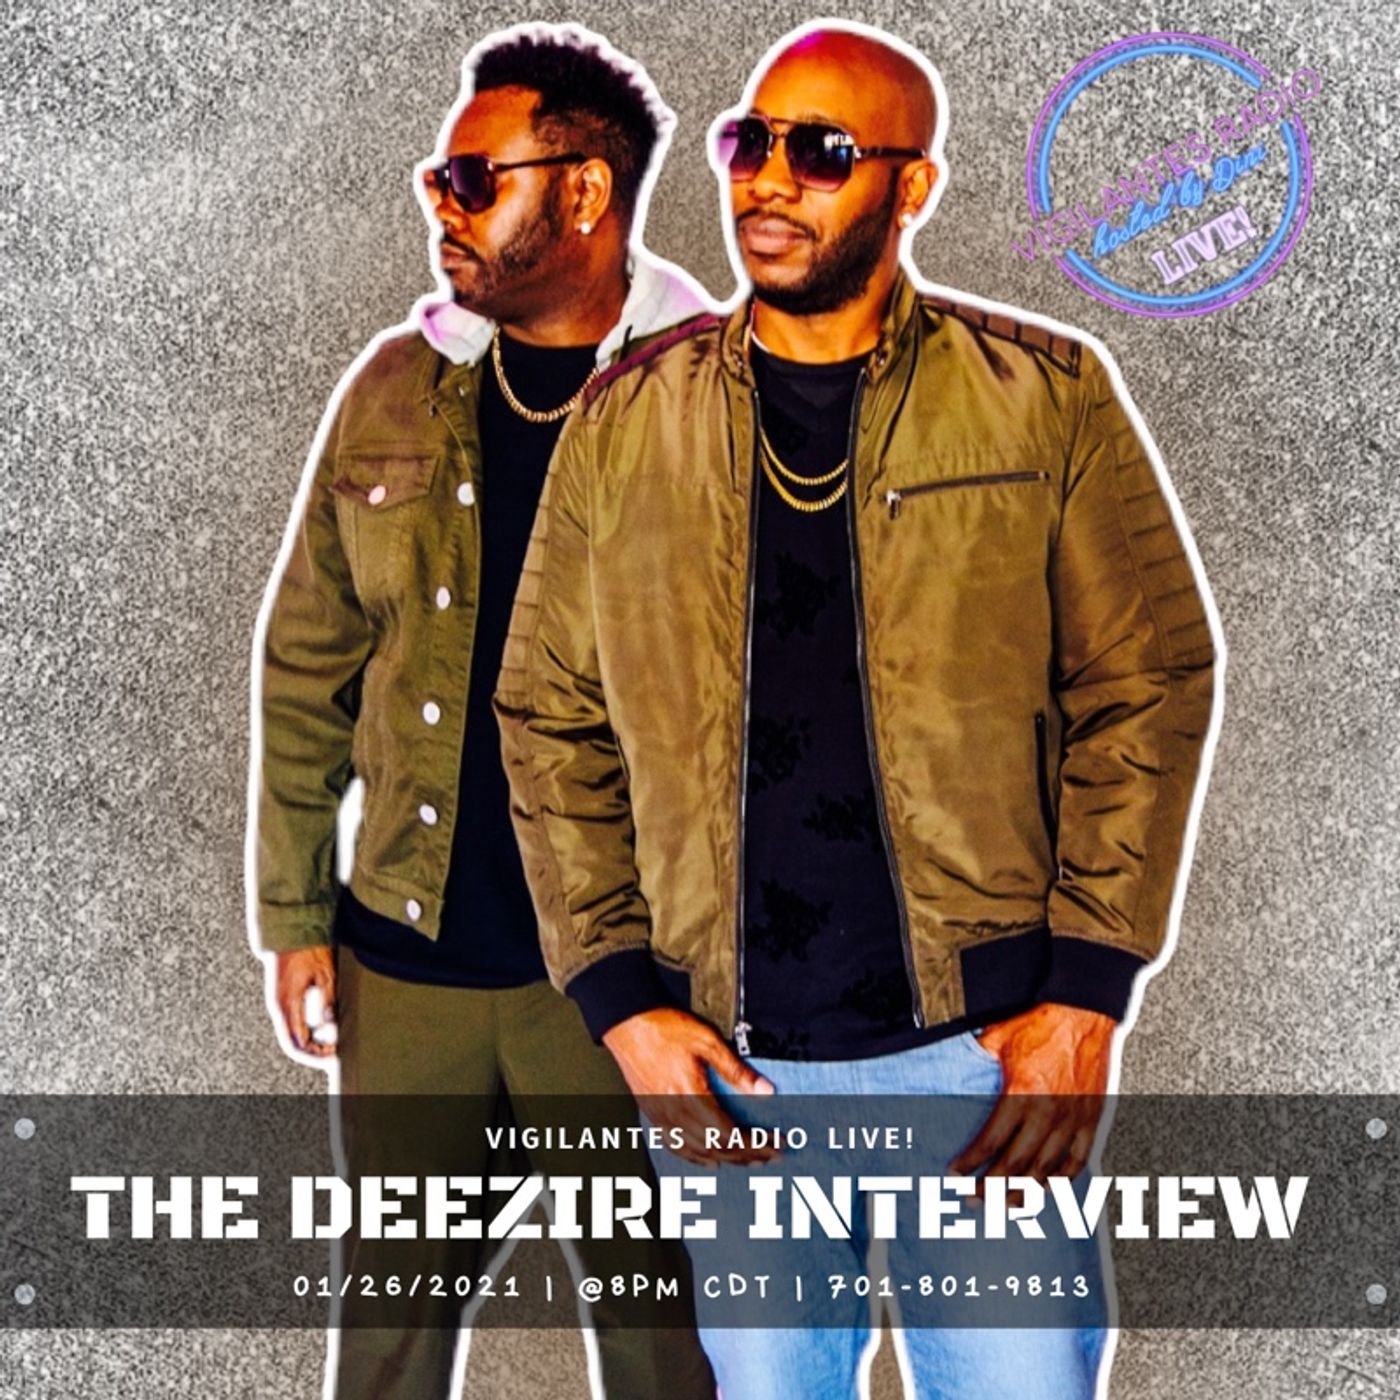 The DeeZire Interview. Image